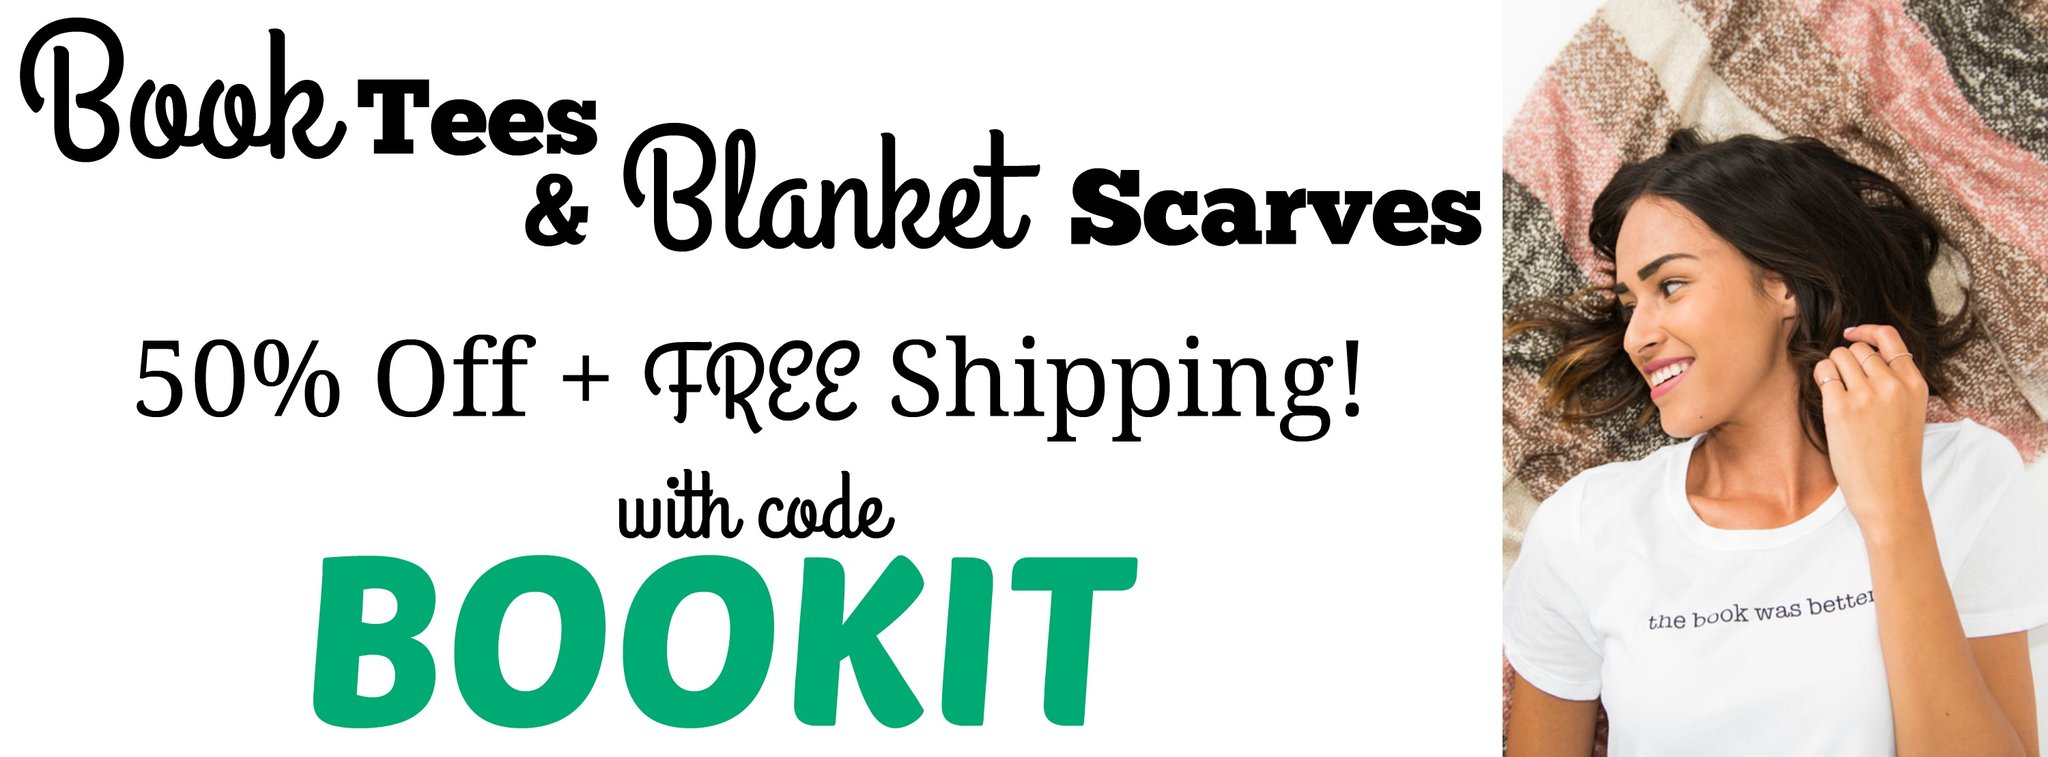 Fashion Friday! 50% Off Book Tees and Blanket Scarves! Free shipping!